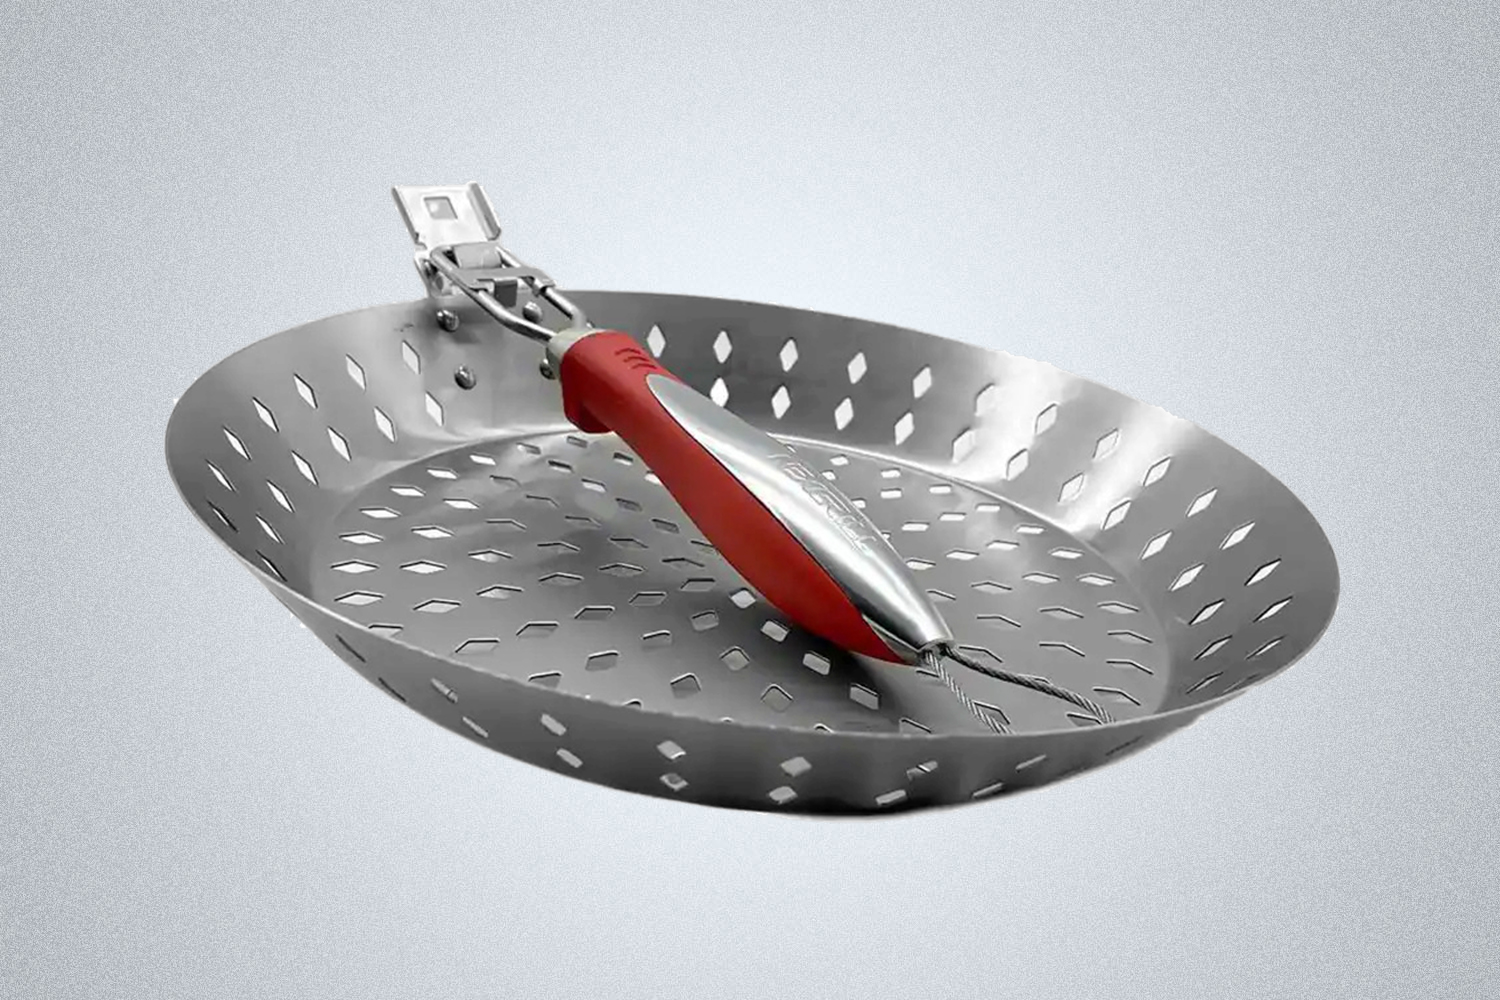 The Nexgrill Revelry Cooking Skillet, a grill pan with holes punched in the bottom, pictured with its handle folded down.